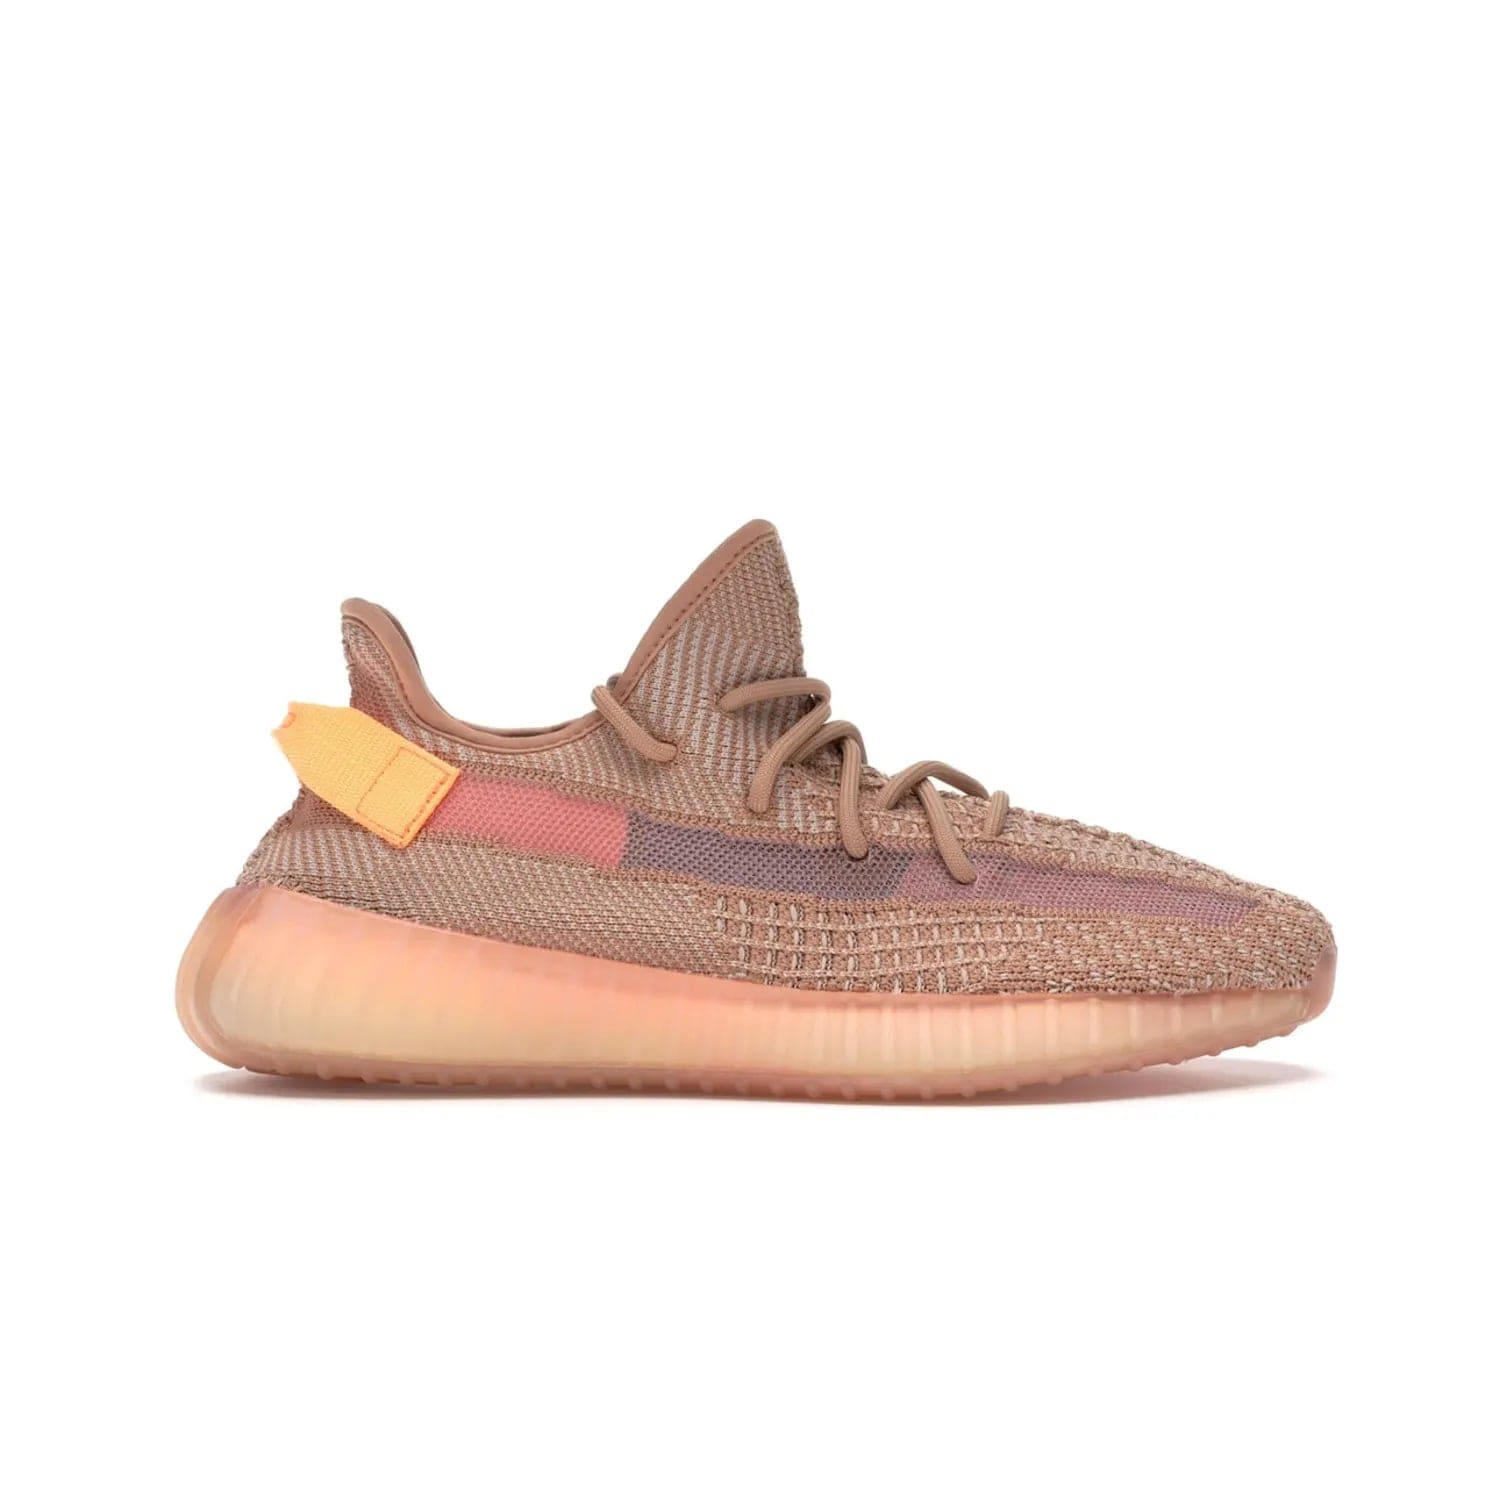 adidas Yeezy Boost 350 V2 Clay - Image 1 - Only at www.BallersClubKickz.com - The adidas Yeezy Boost 350 V2 Clay - style and swag in one shoe. Orange accents, clay midsole and sole. Get yours today!